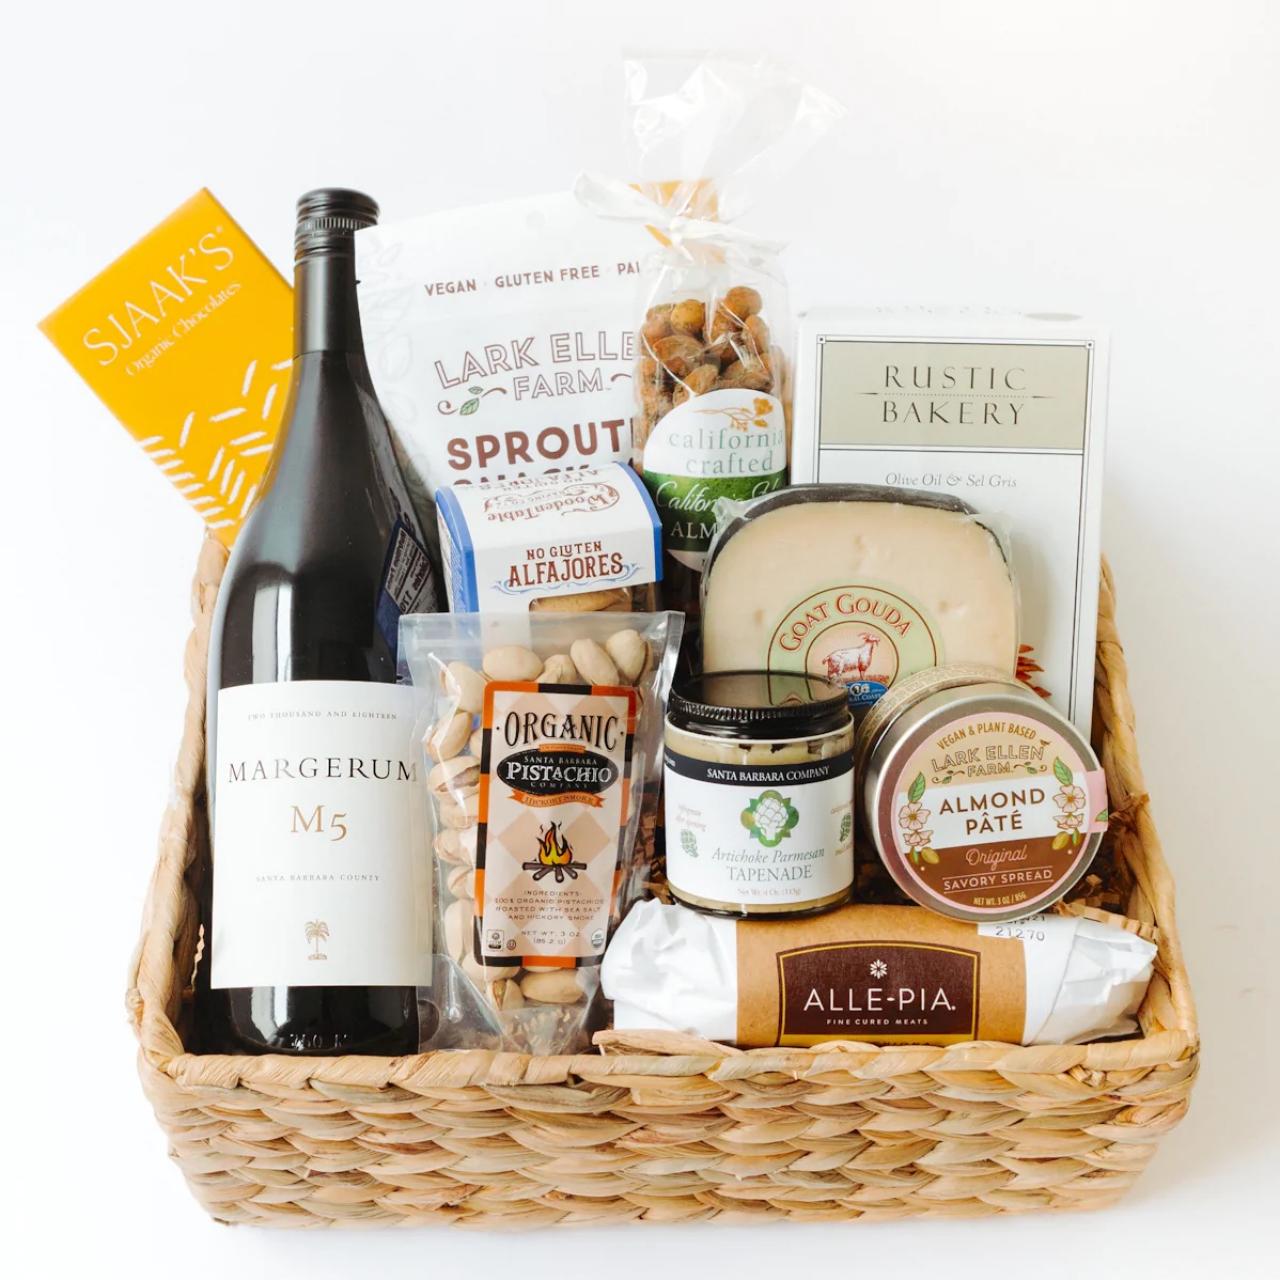 Silent Auction Baskets: 5 Tips to Create Unique Gifts